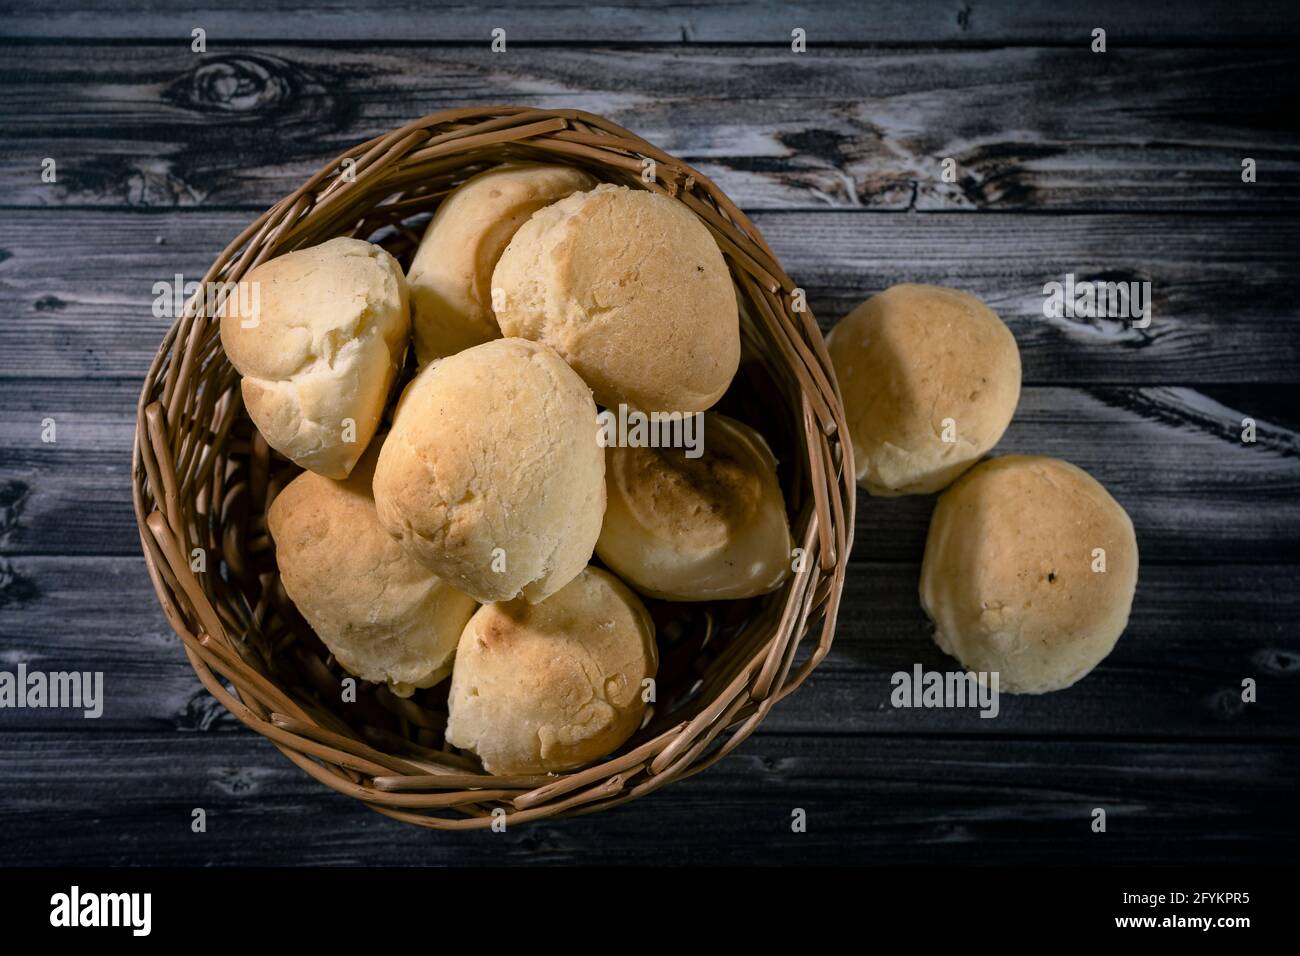 Homemade cassava and cheese bread called chipa. Classic cheese bread from Argentina, Paraguay and Brazil. Stock Photo